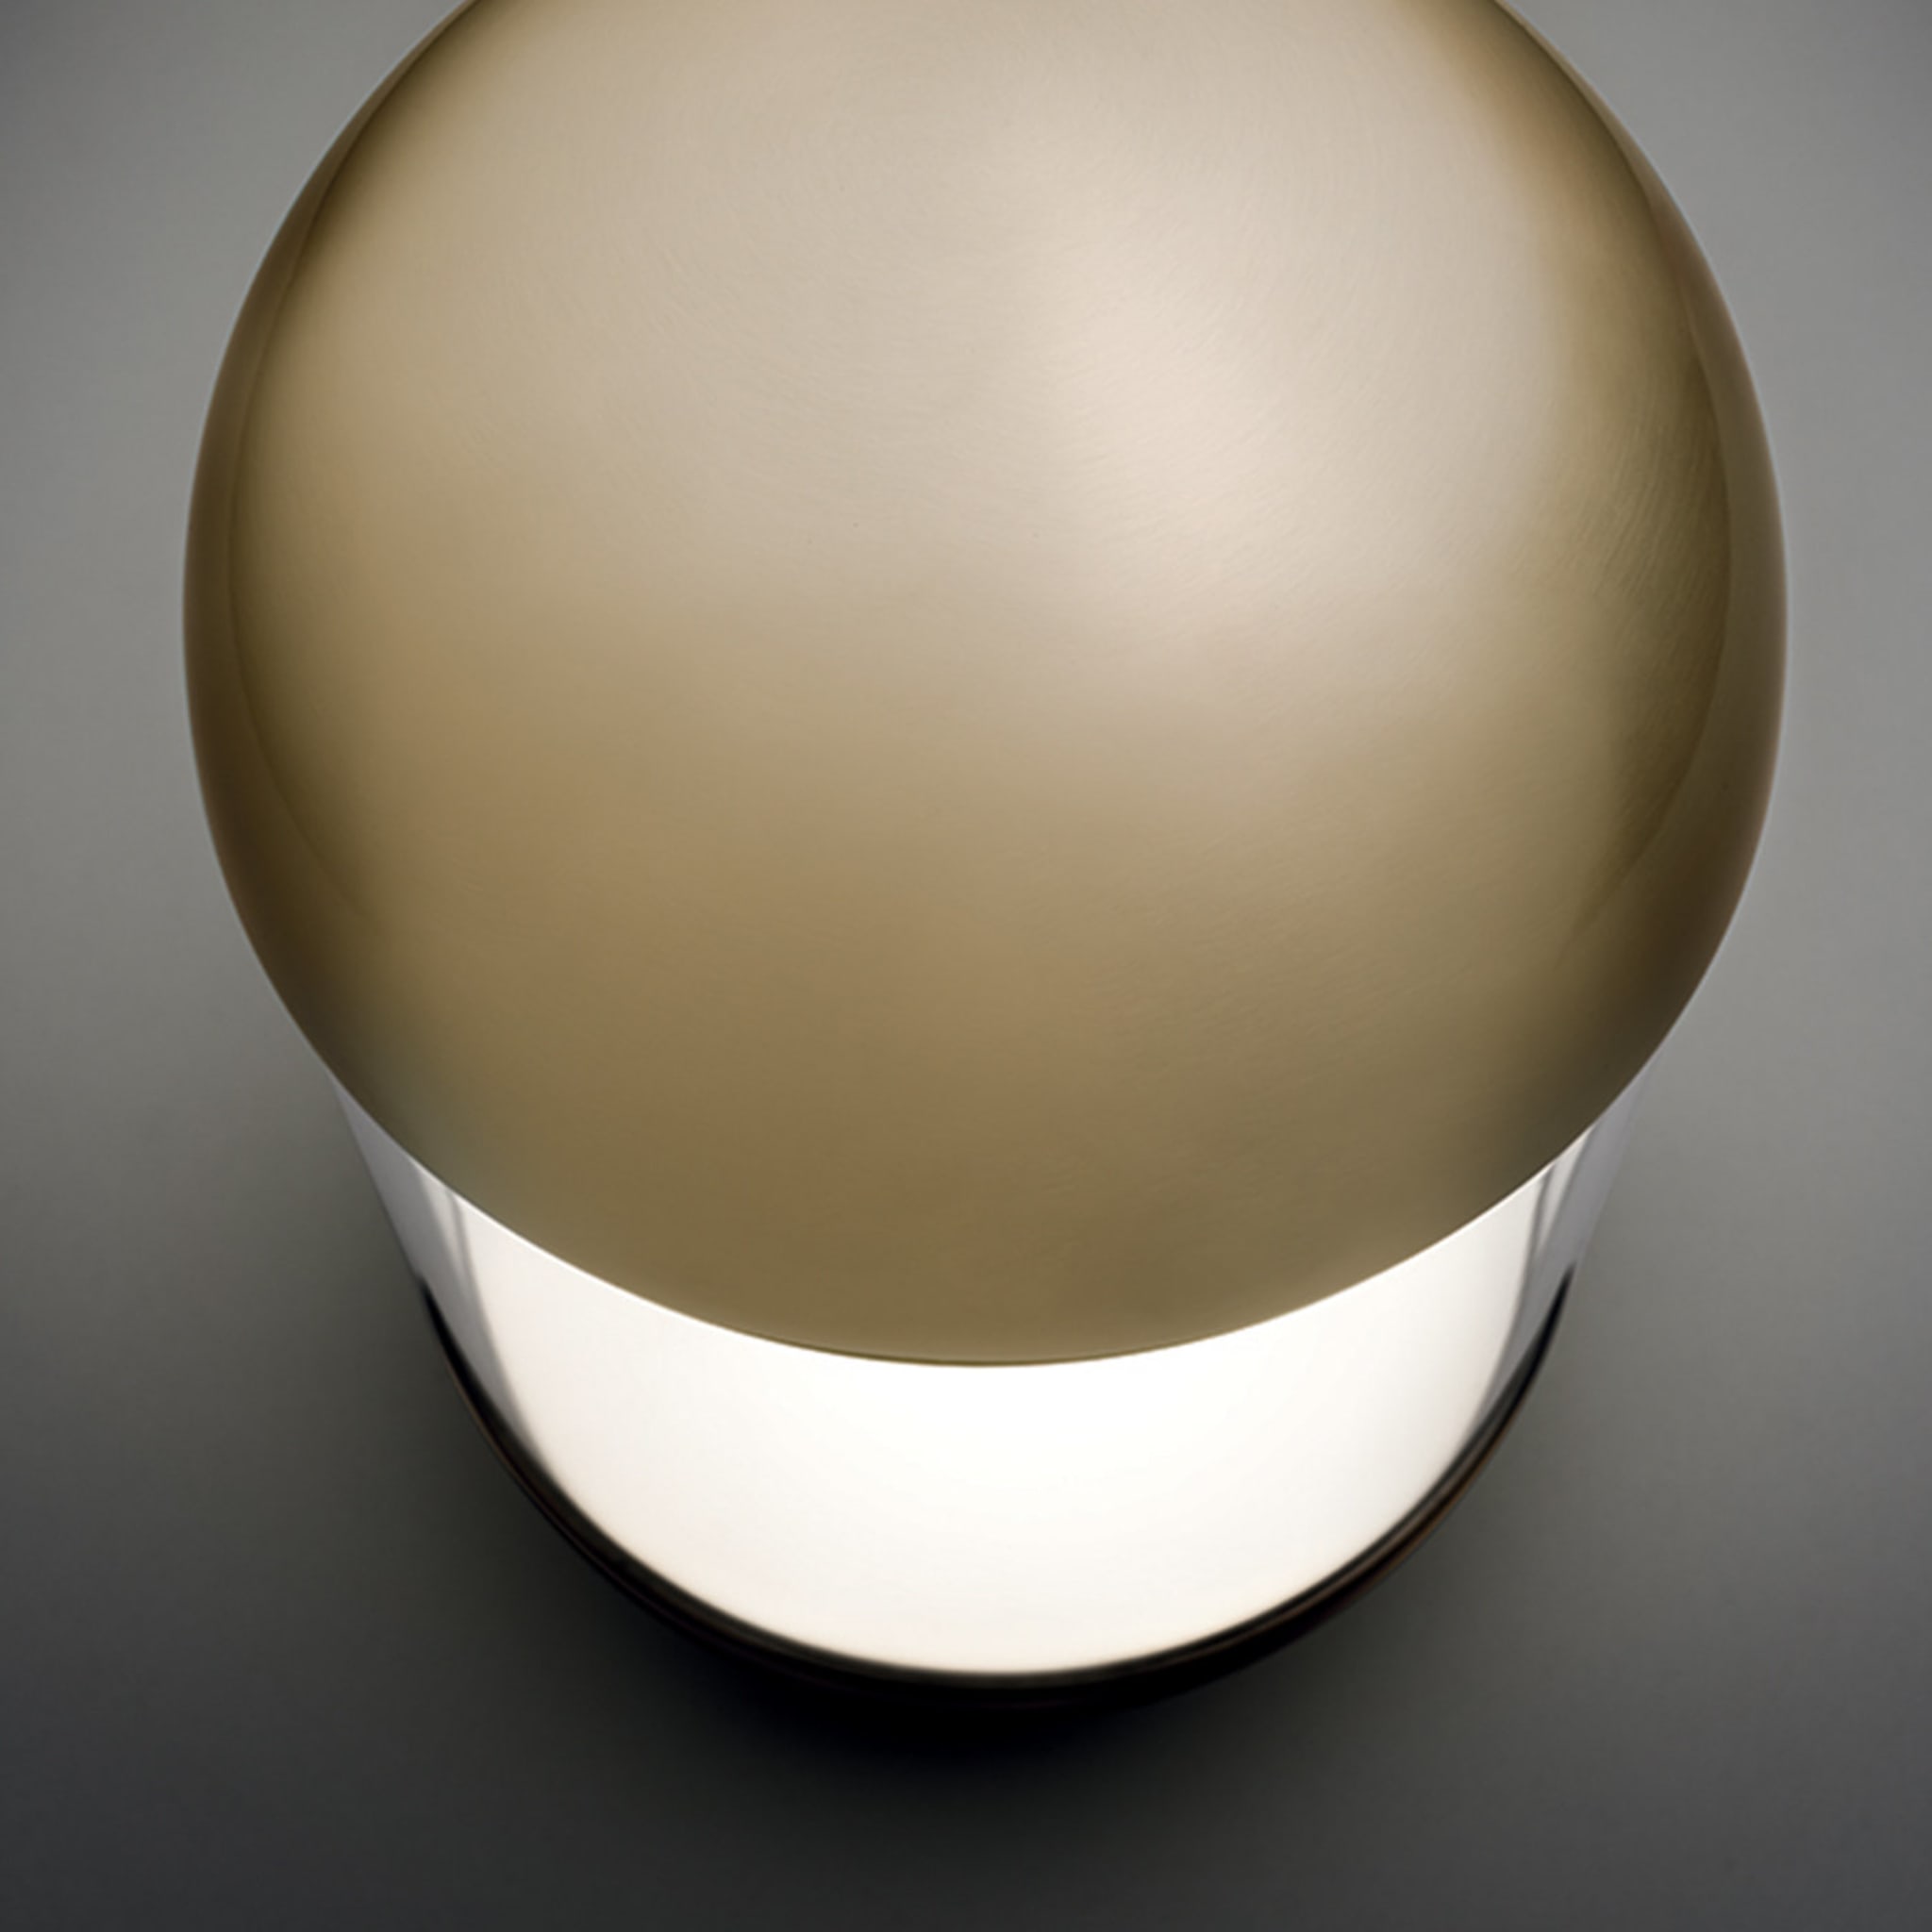 Pillola Table Lamp Gold By Parisotto + Formenton - Alternative view 1